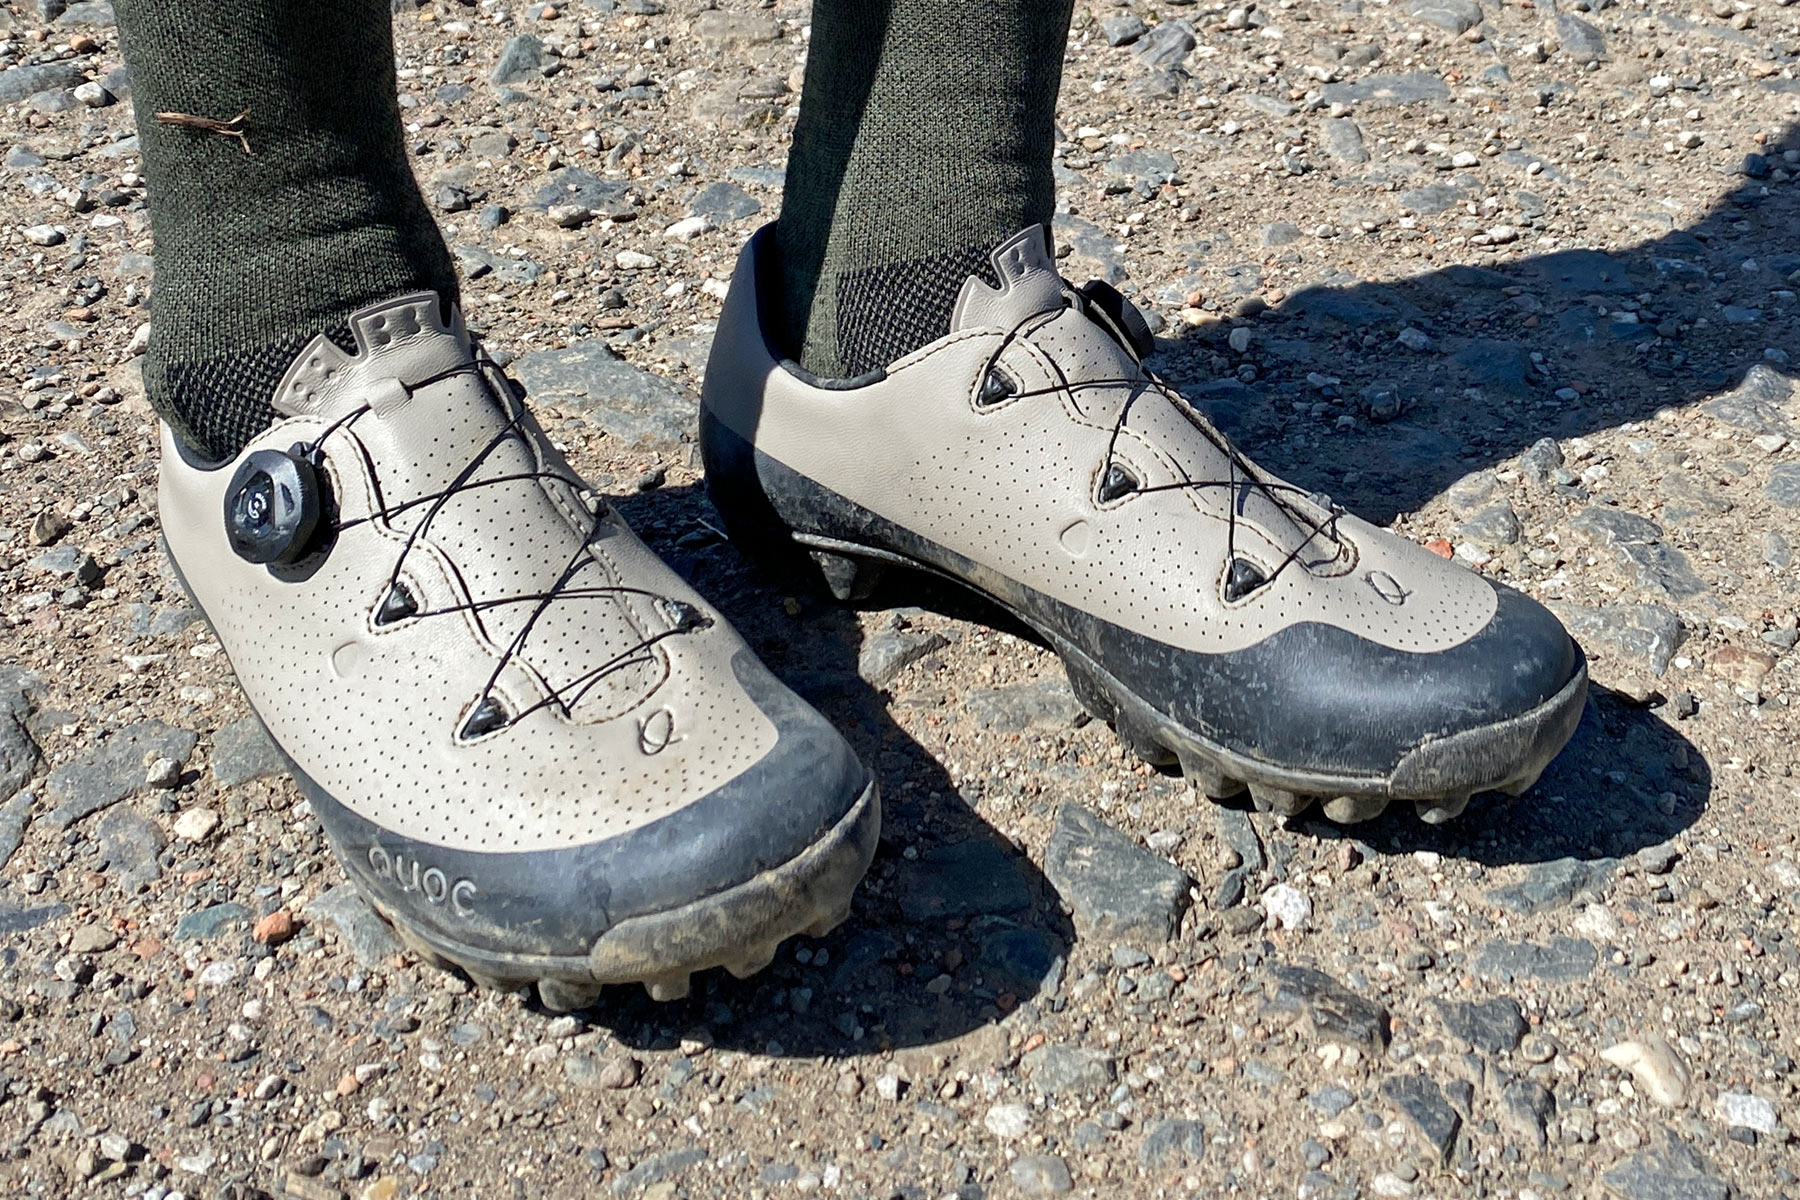 Quoc Gran Tourer II gravel bike shoes updated with dial retention